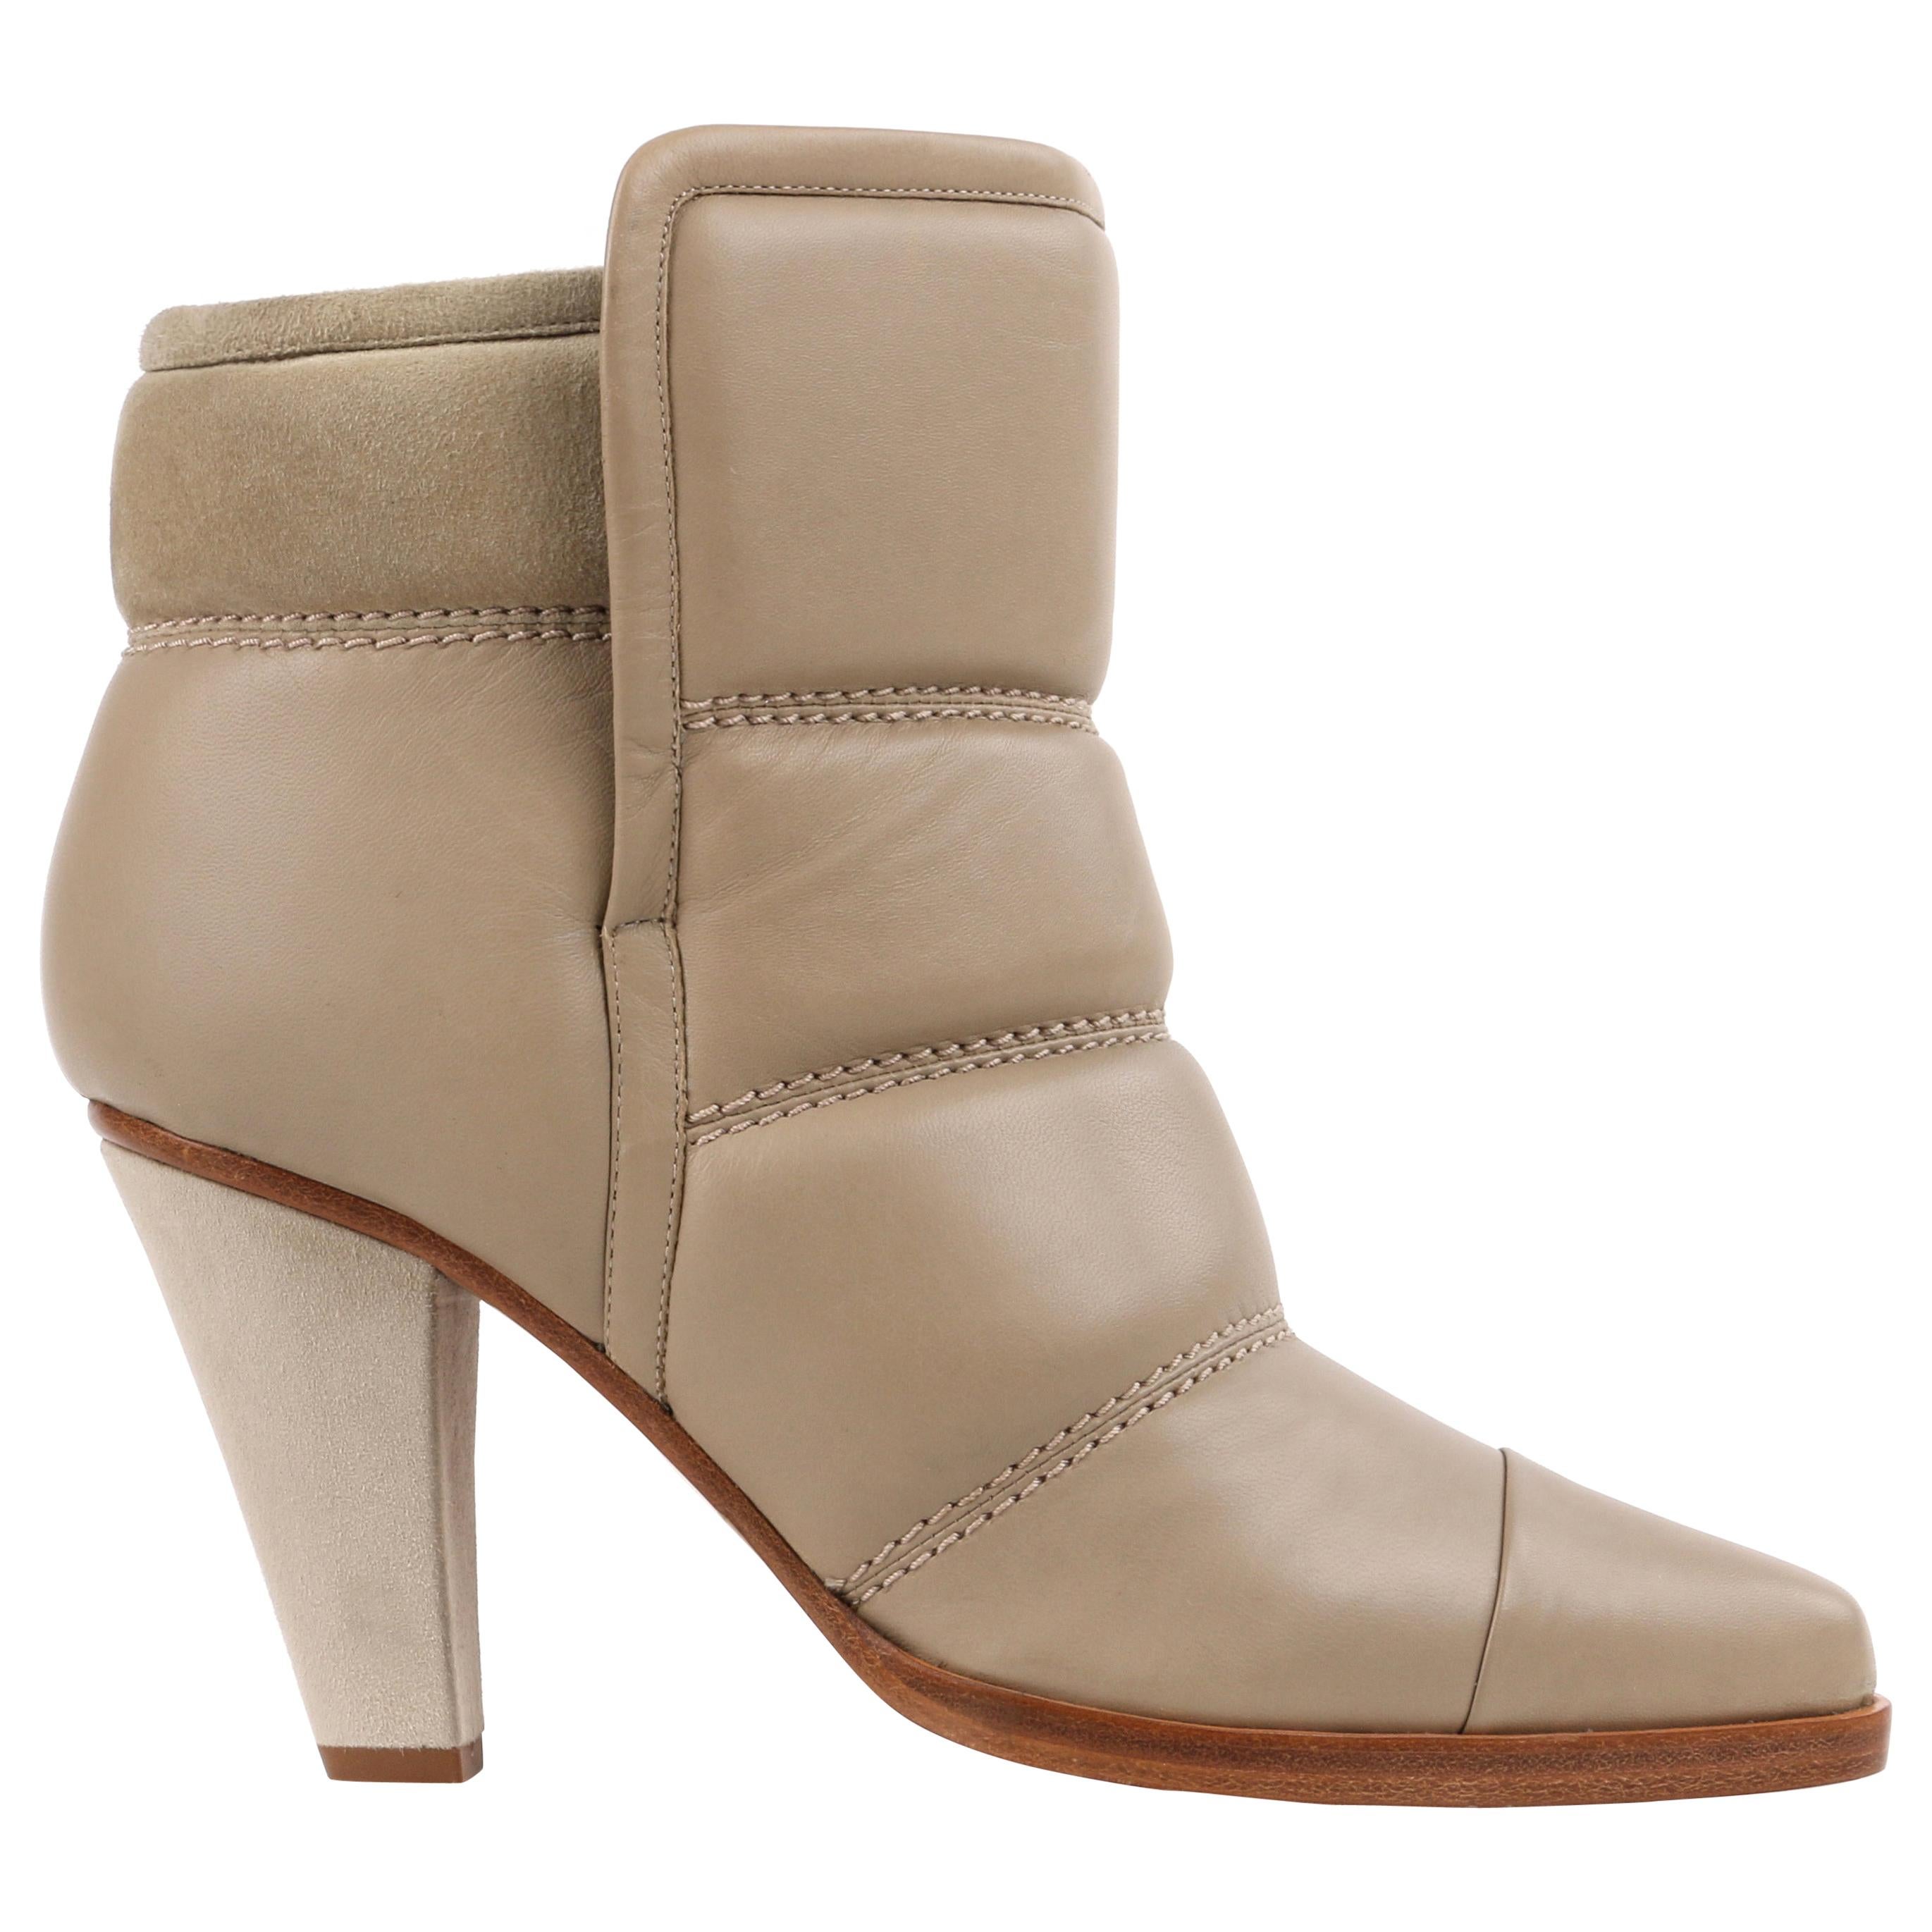 CHLOE A/W 2014 "Devon" Natural Taupe Padded Quilted Leather Suede Ankle Booties